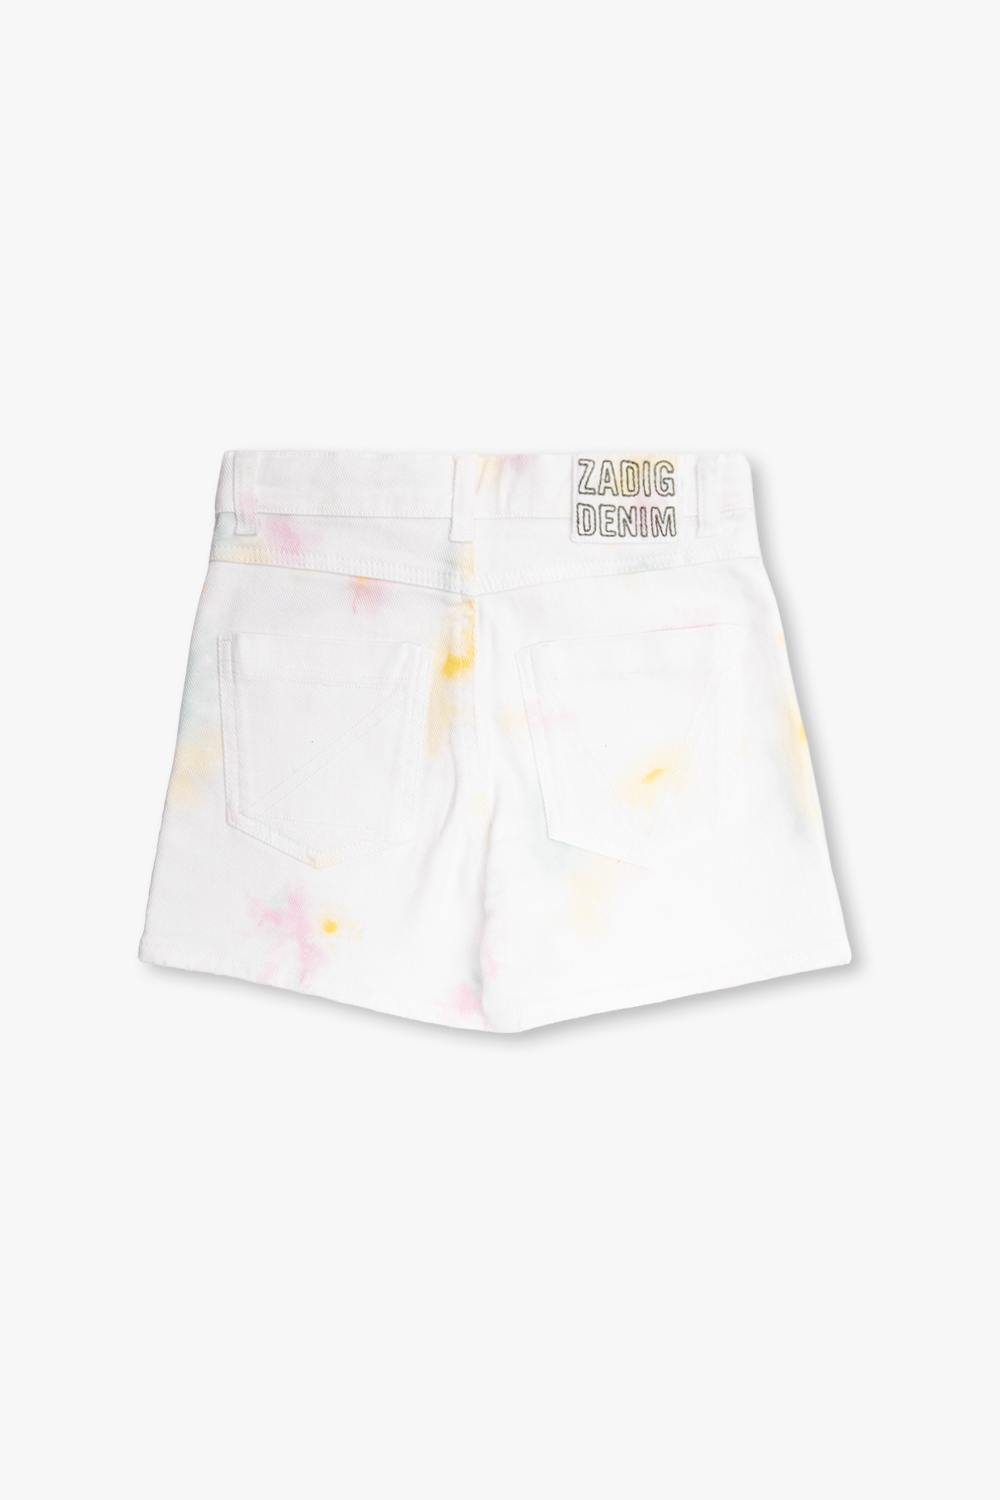 Zadig & Voltaire Kids Printed co-ord shorts